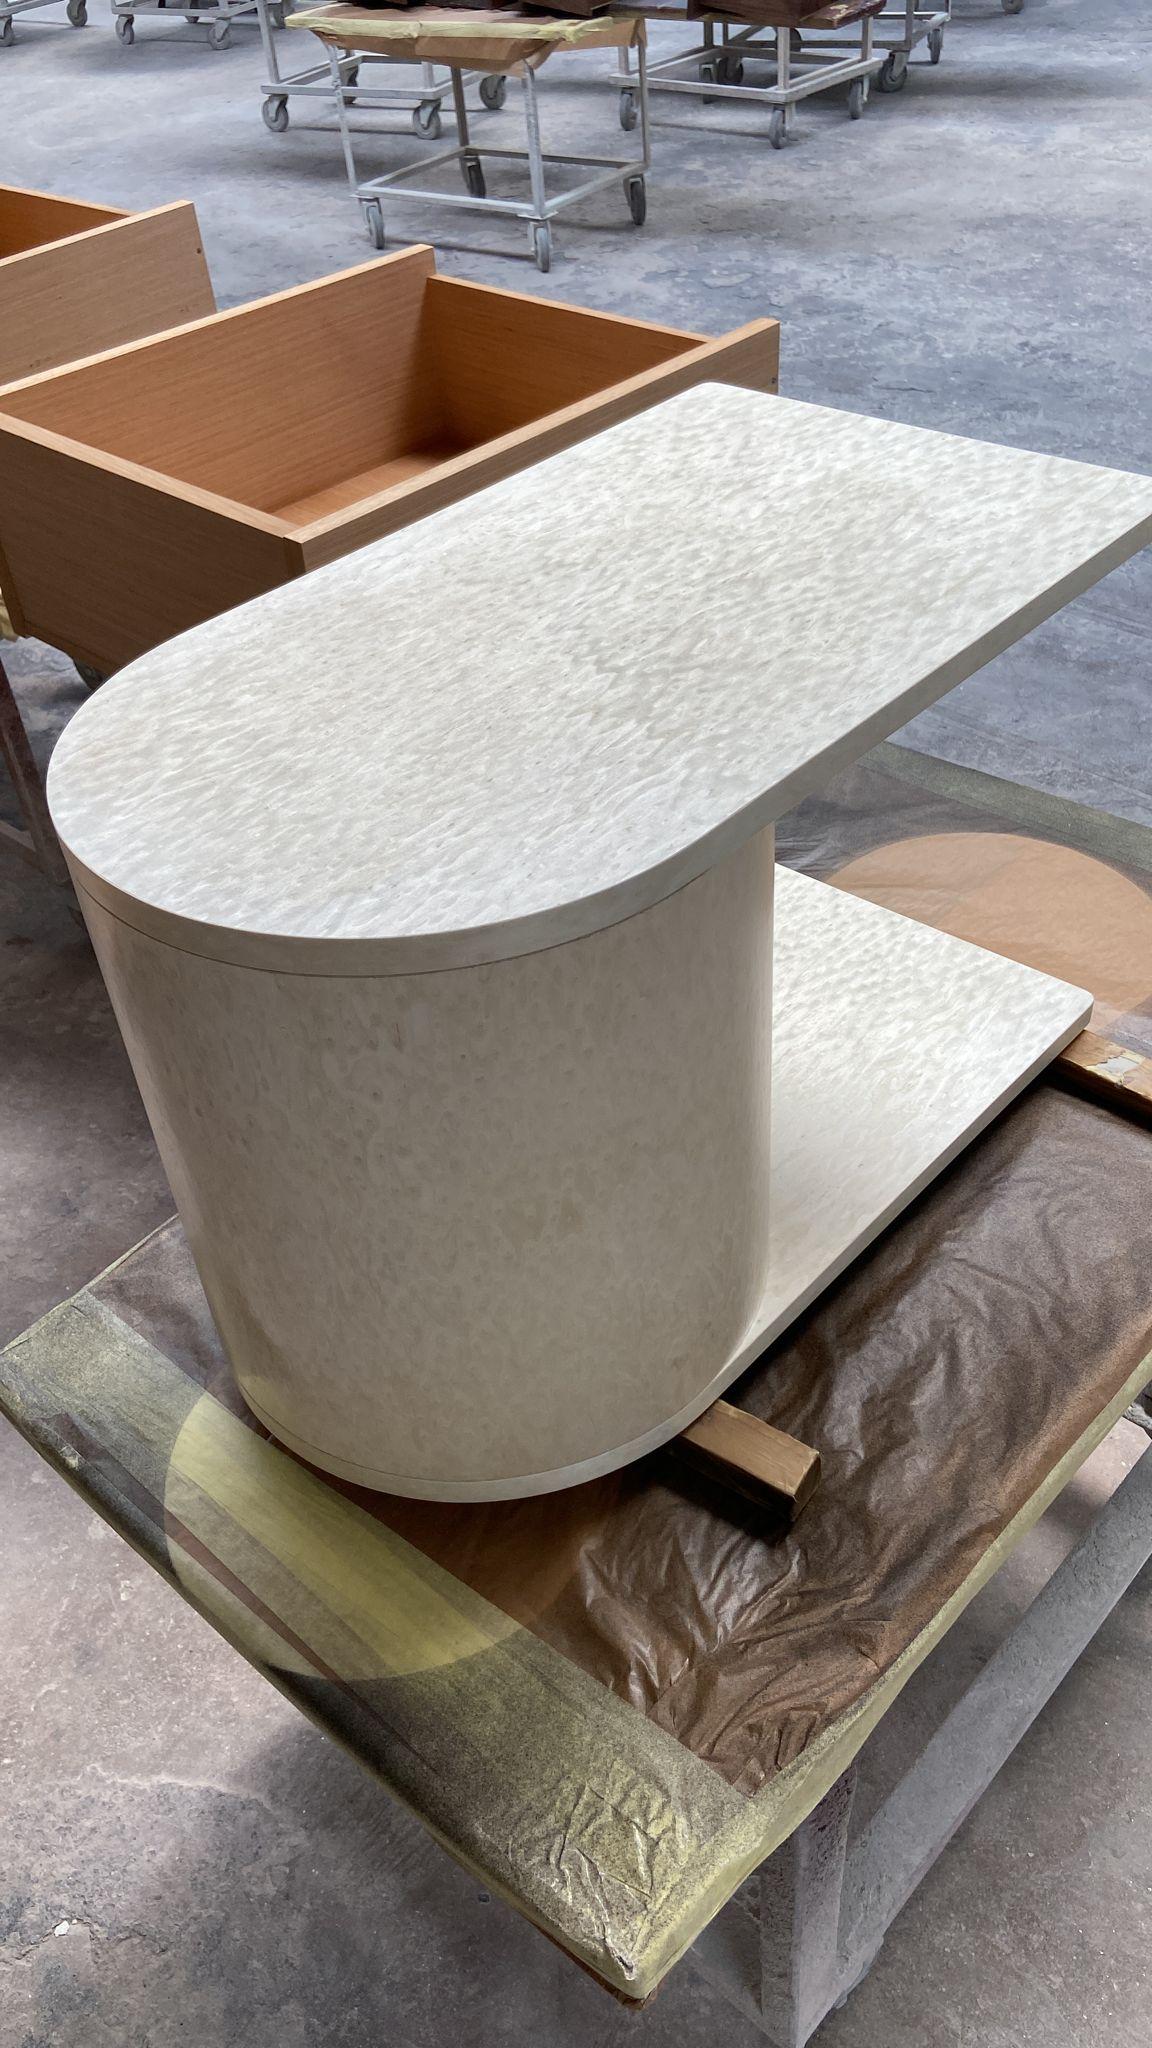 Side table in white Louro faya veneer.

As with all our furniture, this table is made to order and is therefore highly customisable, including in size and finish. The customisation fee is only 10%, which is added to the retail price.
